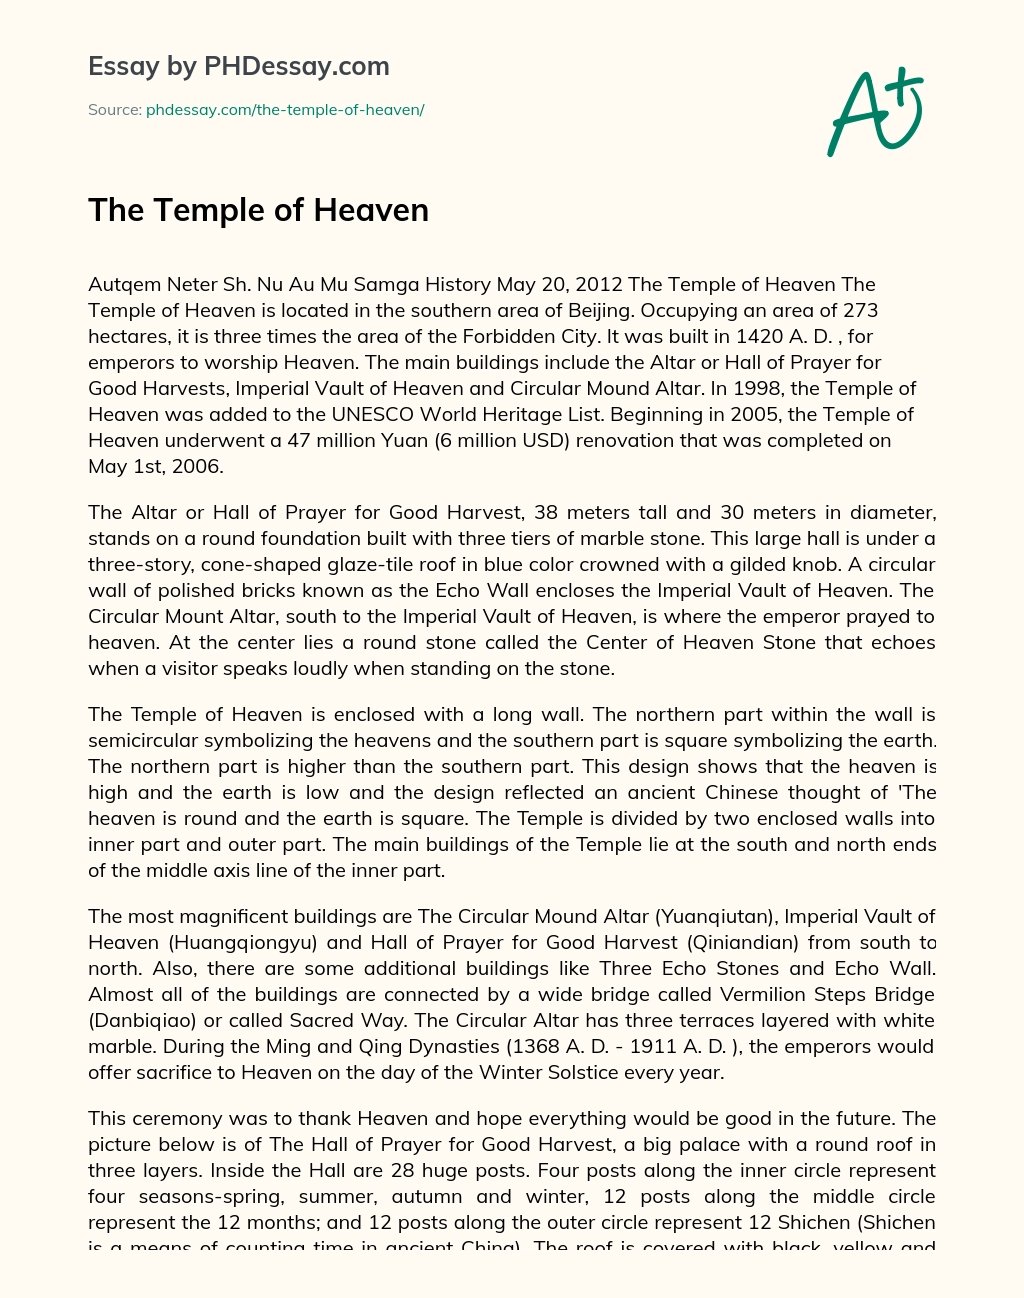 The Temple of Heaven essay